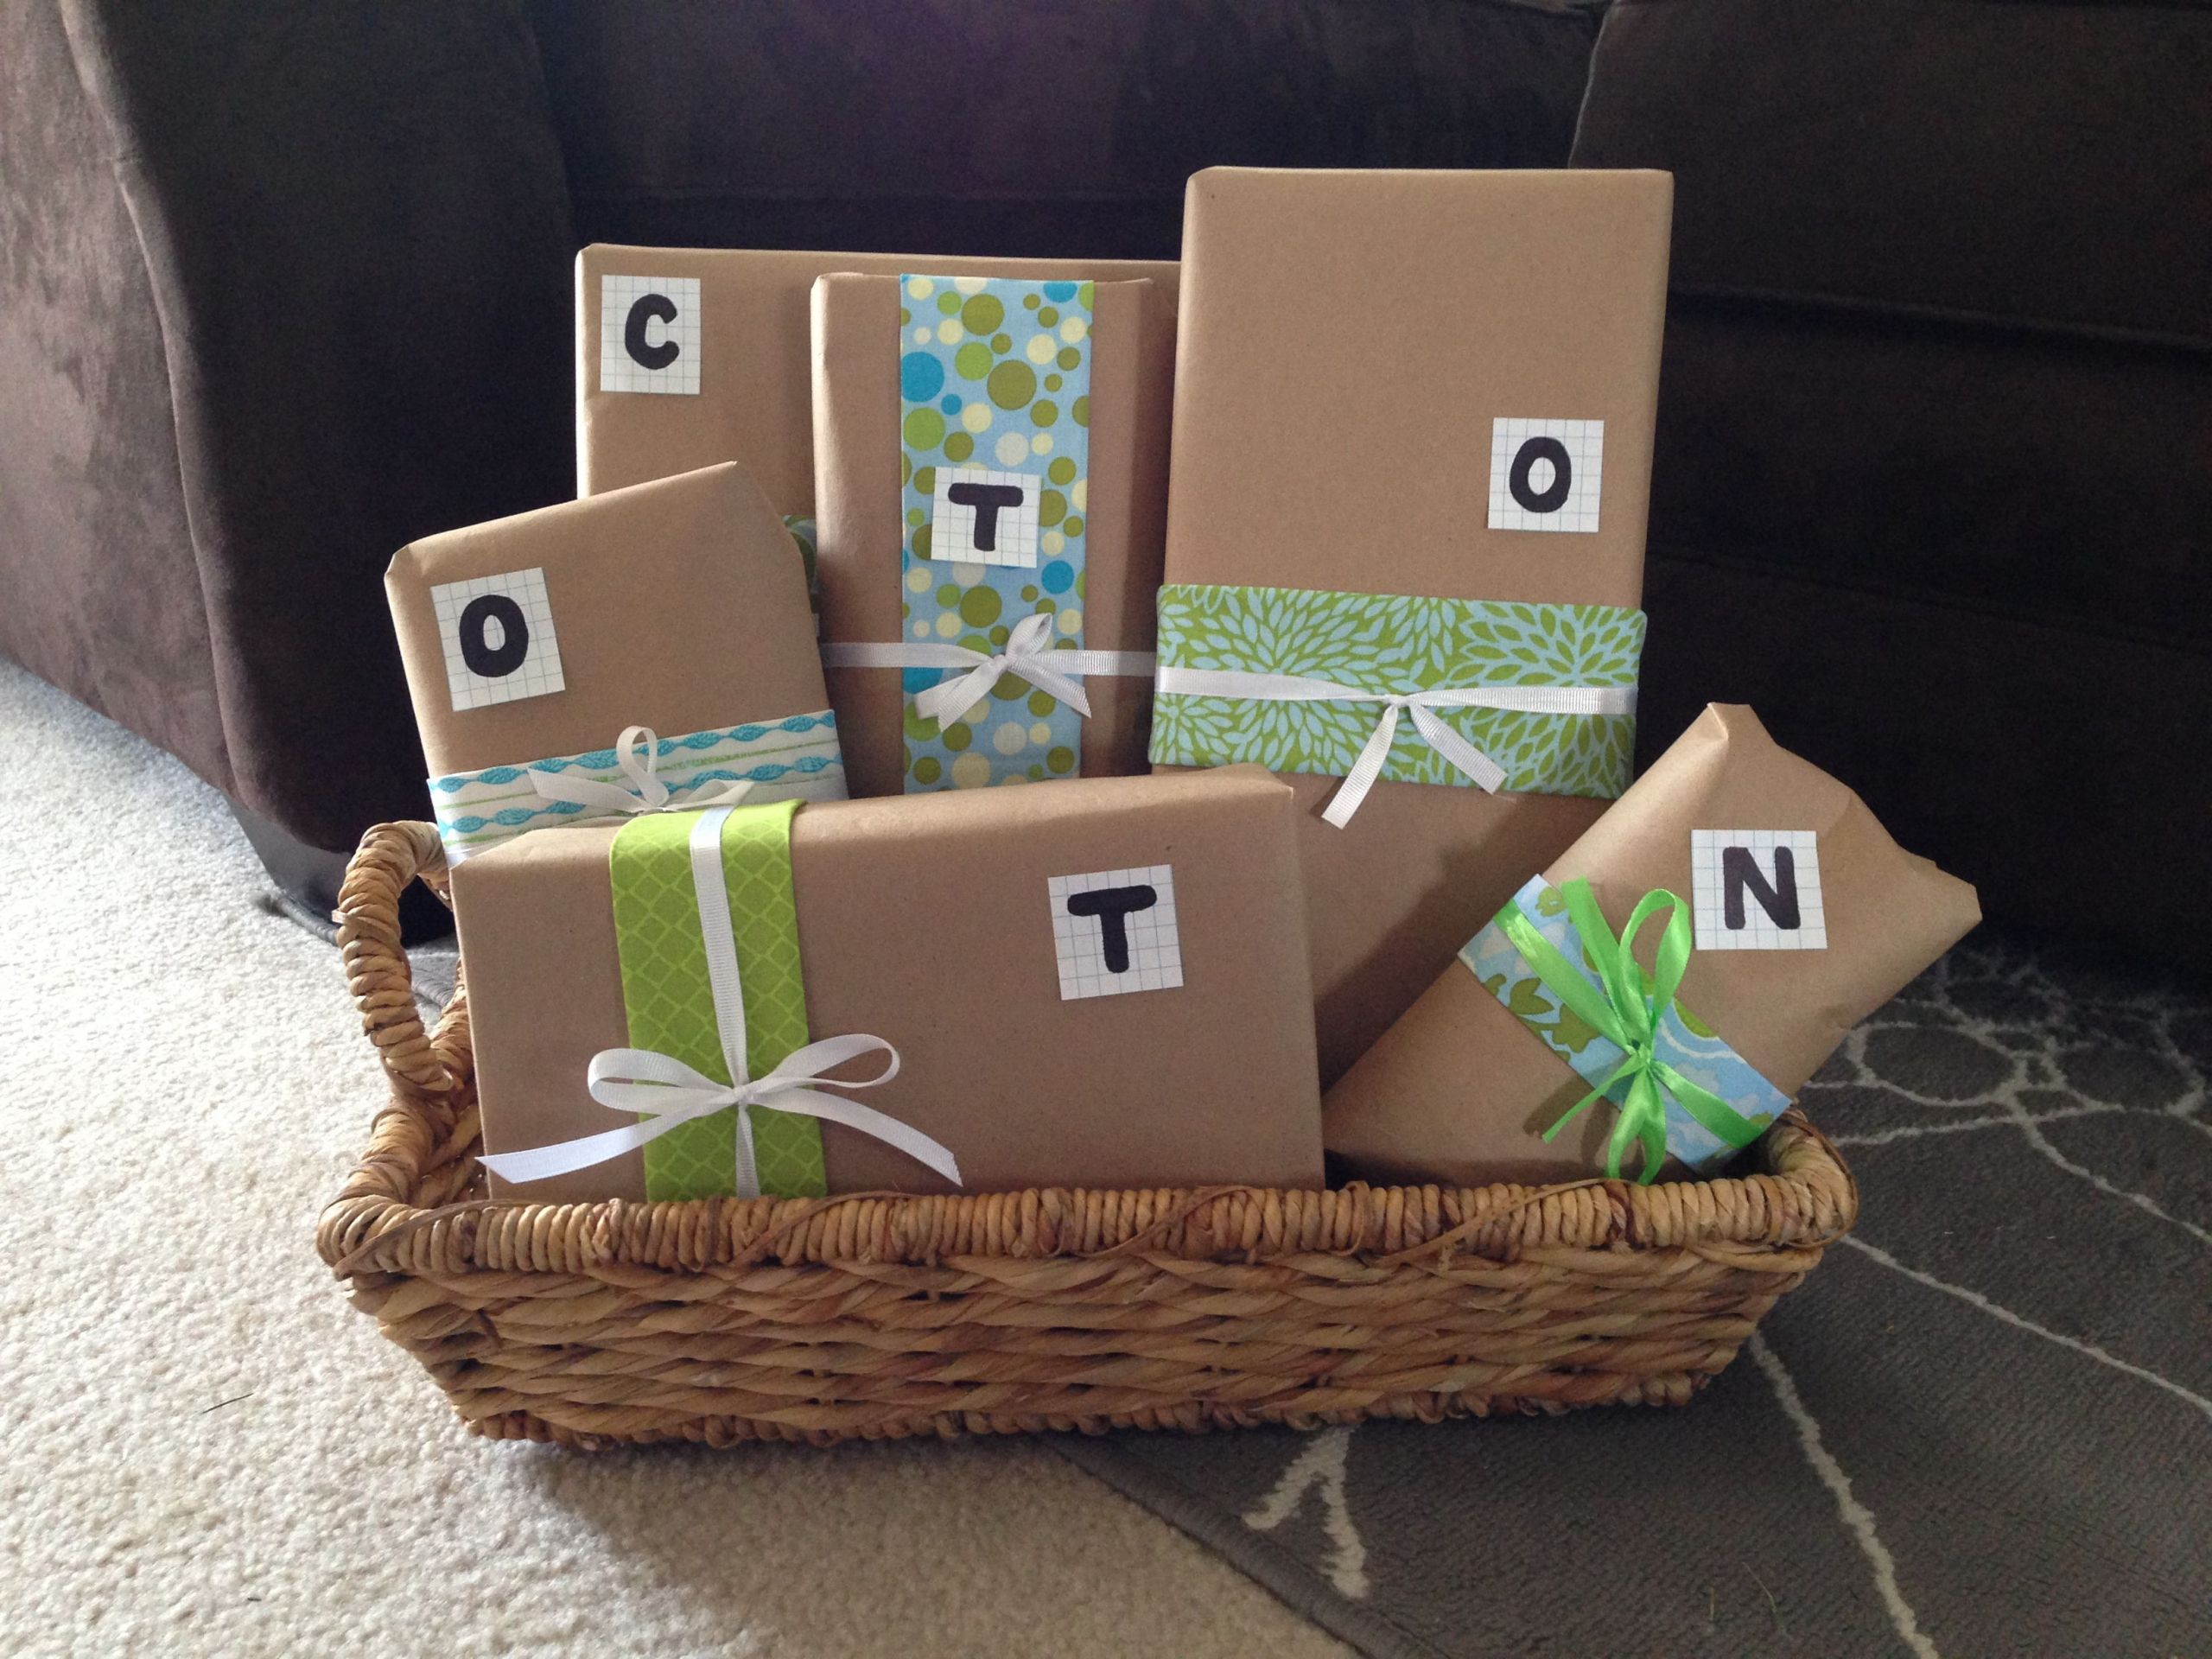 Second Anniversary Cotton Gift Ideas
 2nd Anniversary t for "COTTON" C=corn hole bags O=d ut